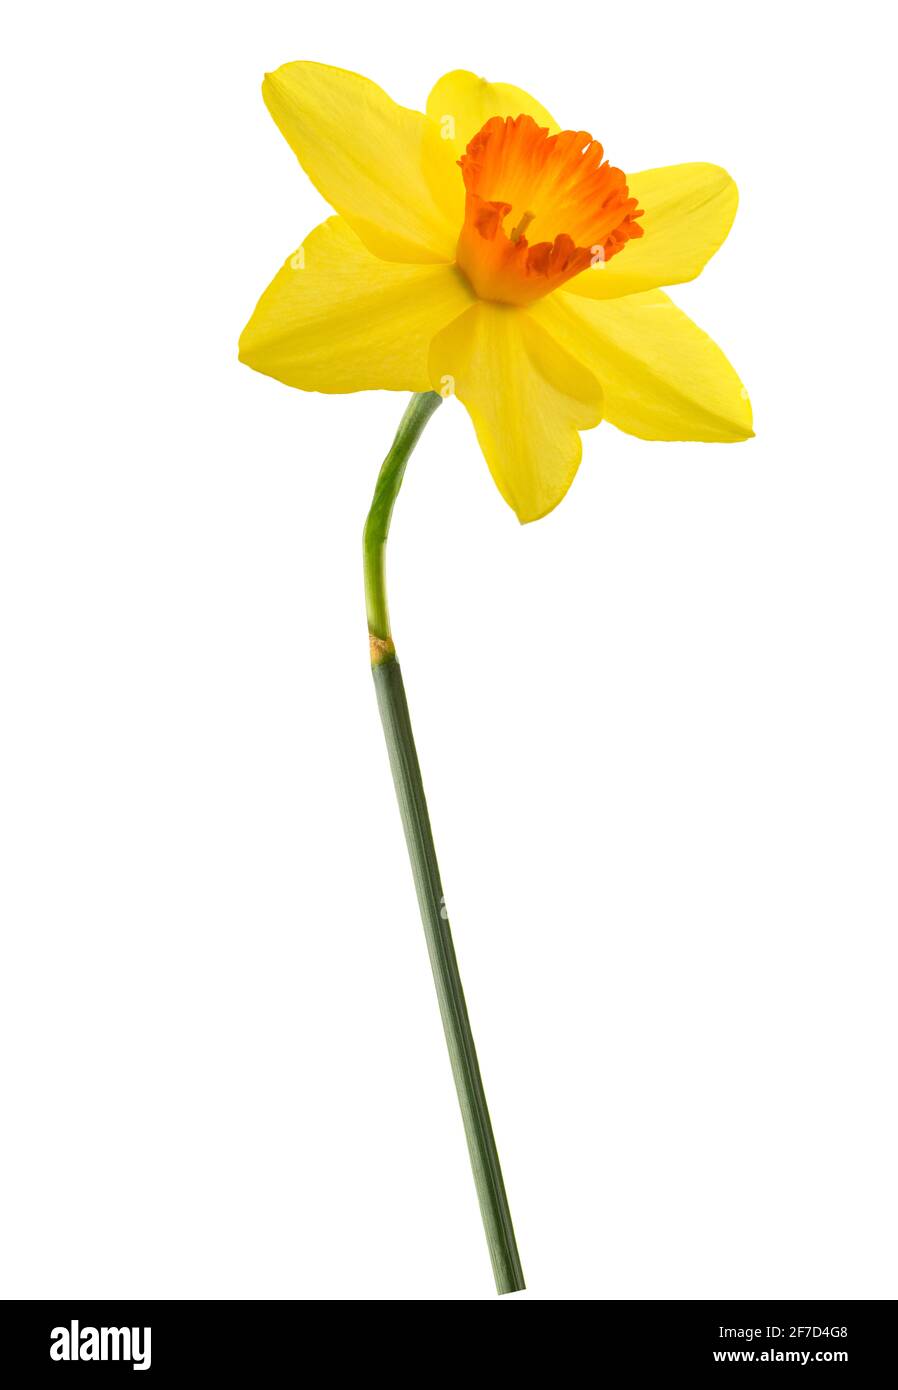 Yellow Daffodil flower isolated on white background Stock Photo